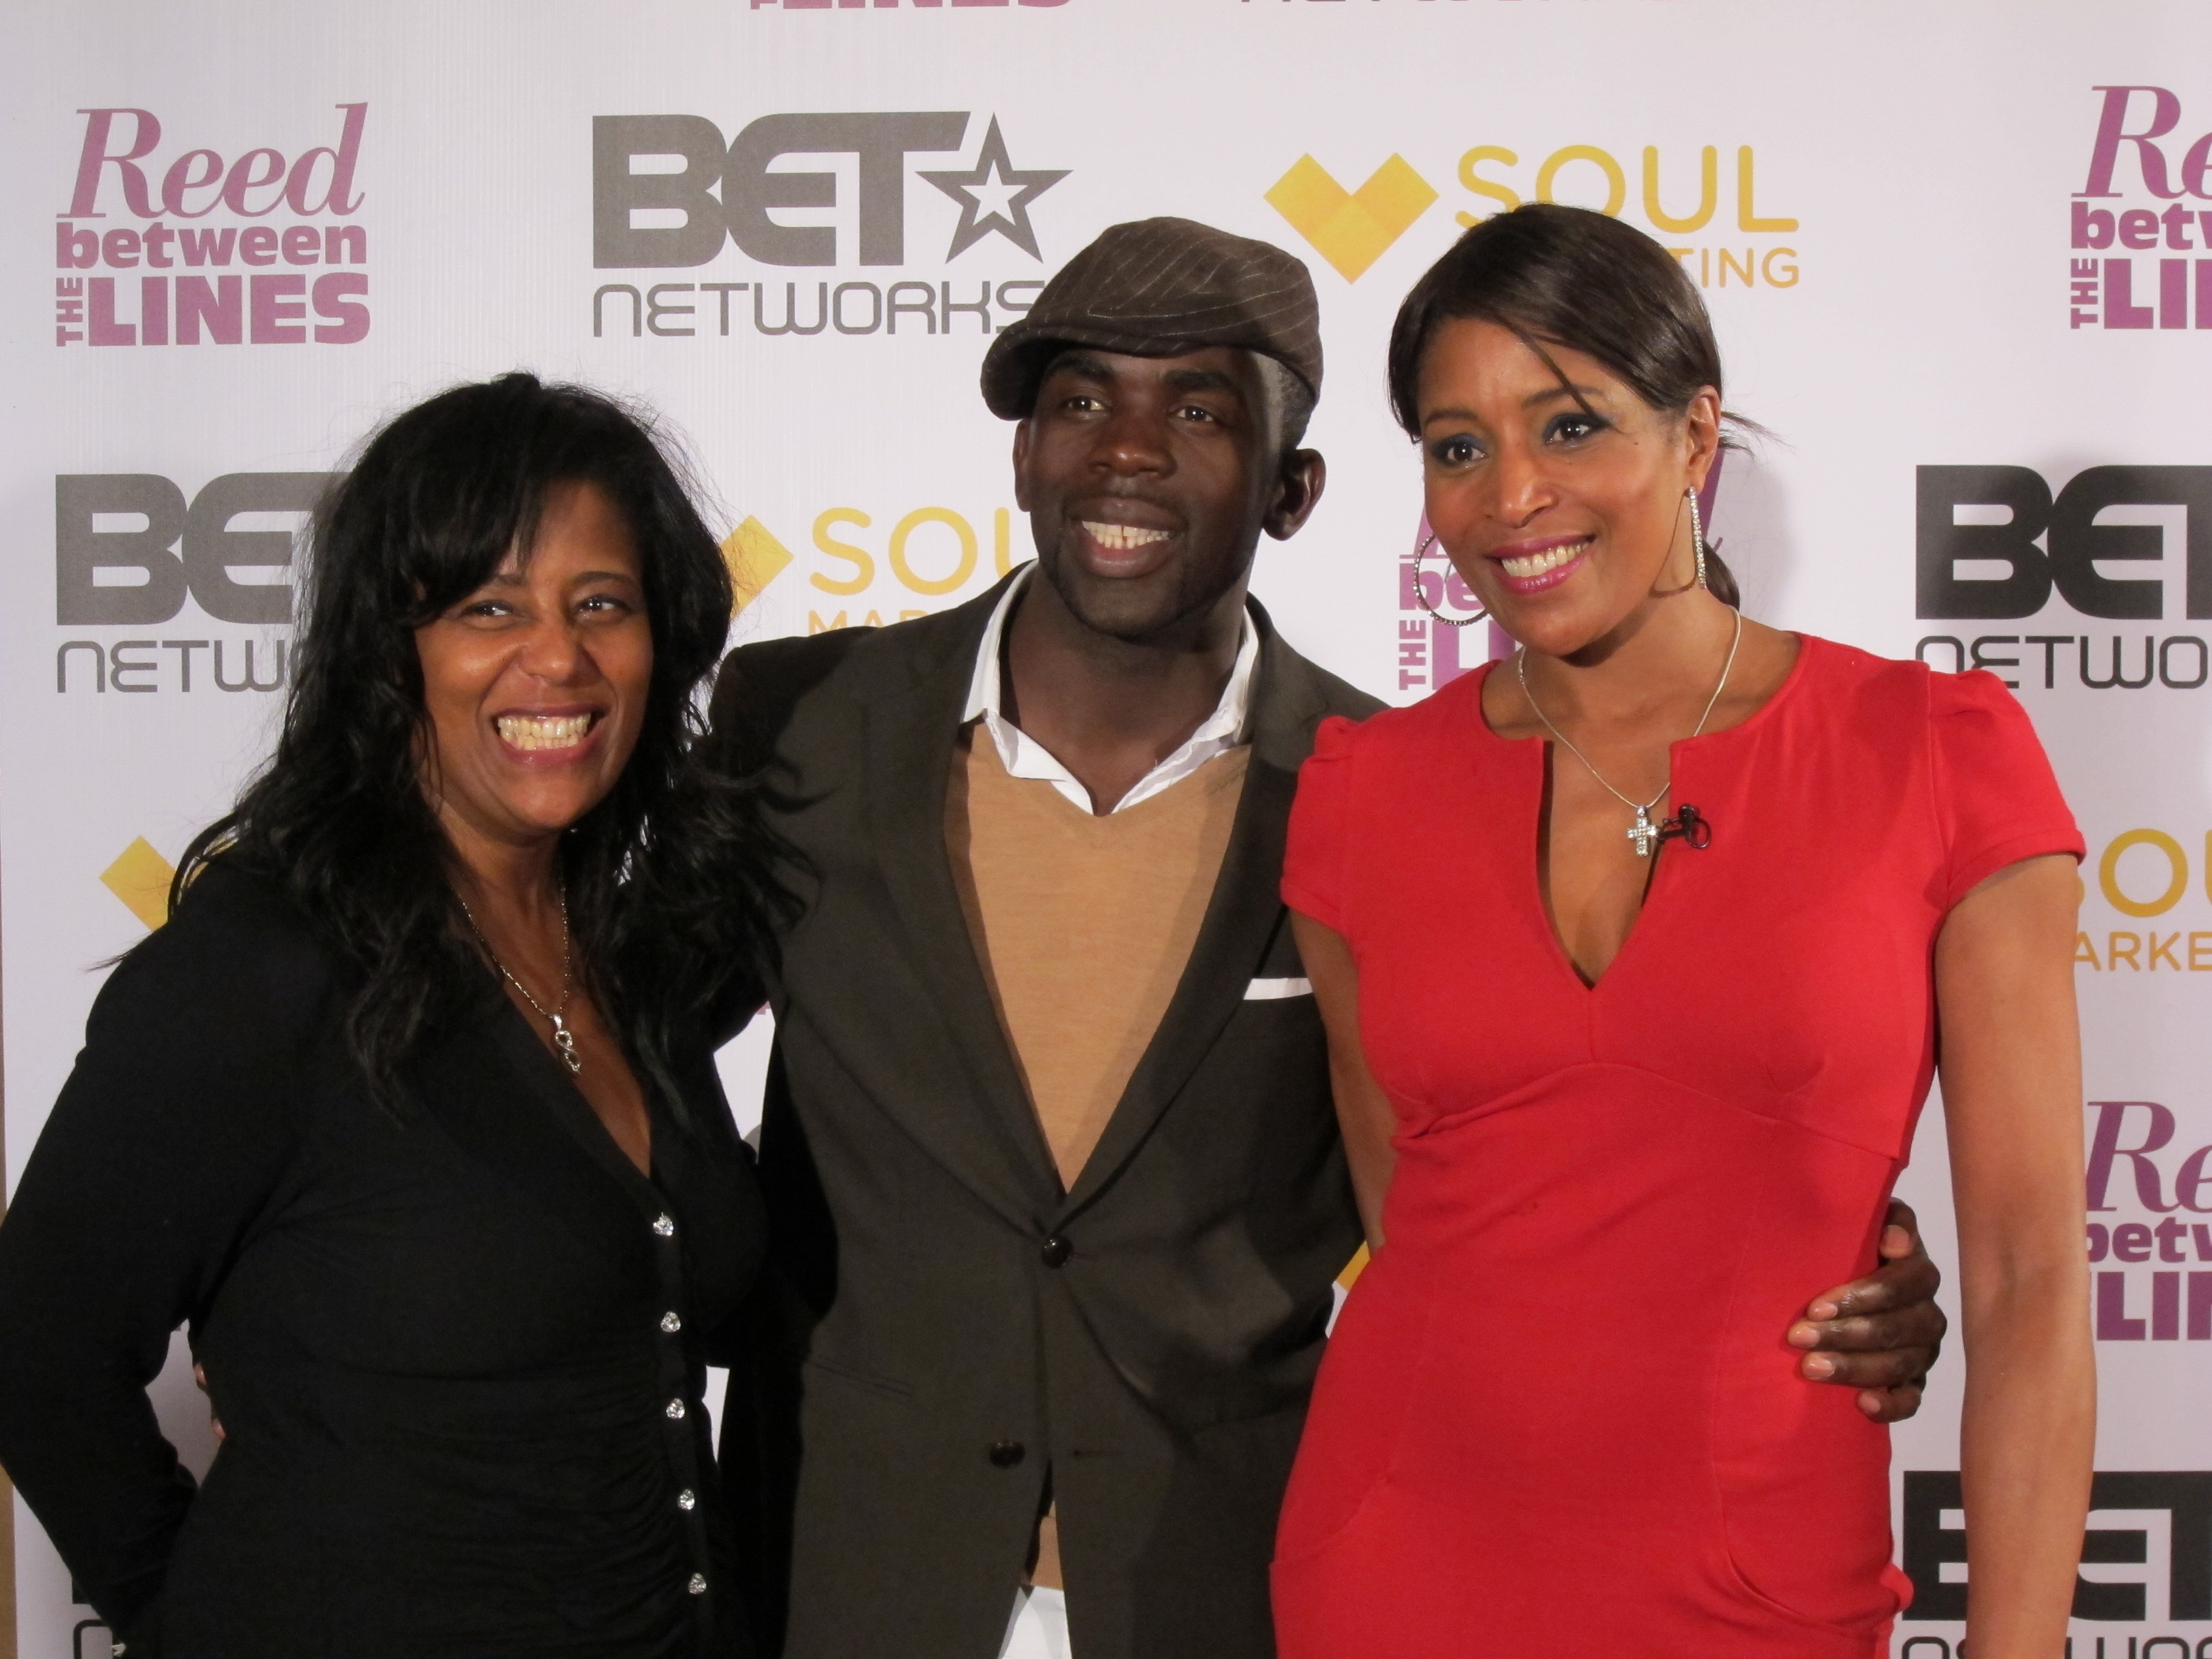 BET Event with Jacqui Joseph and Jimmy Akingbola.